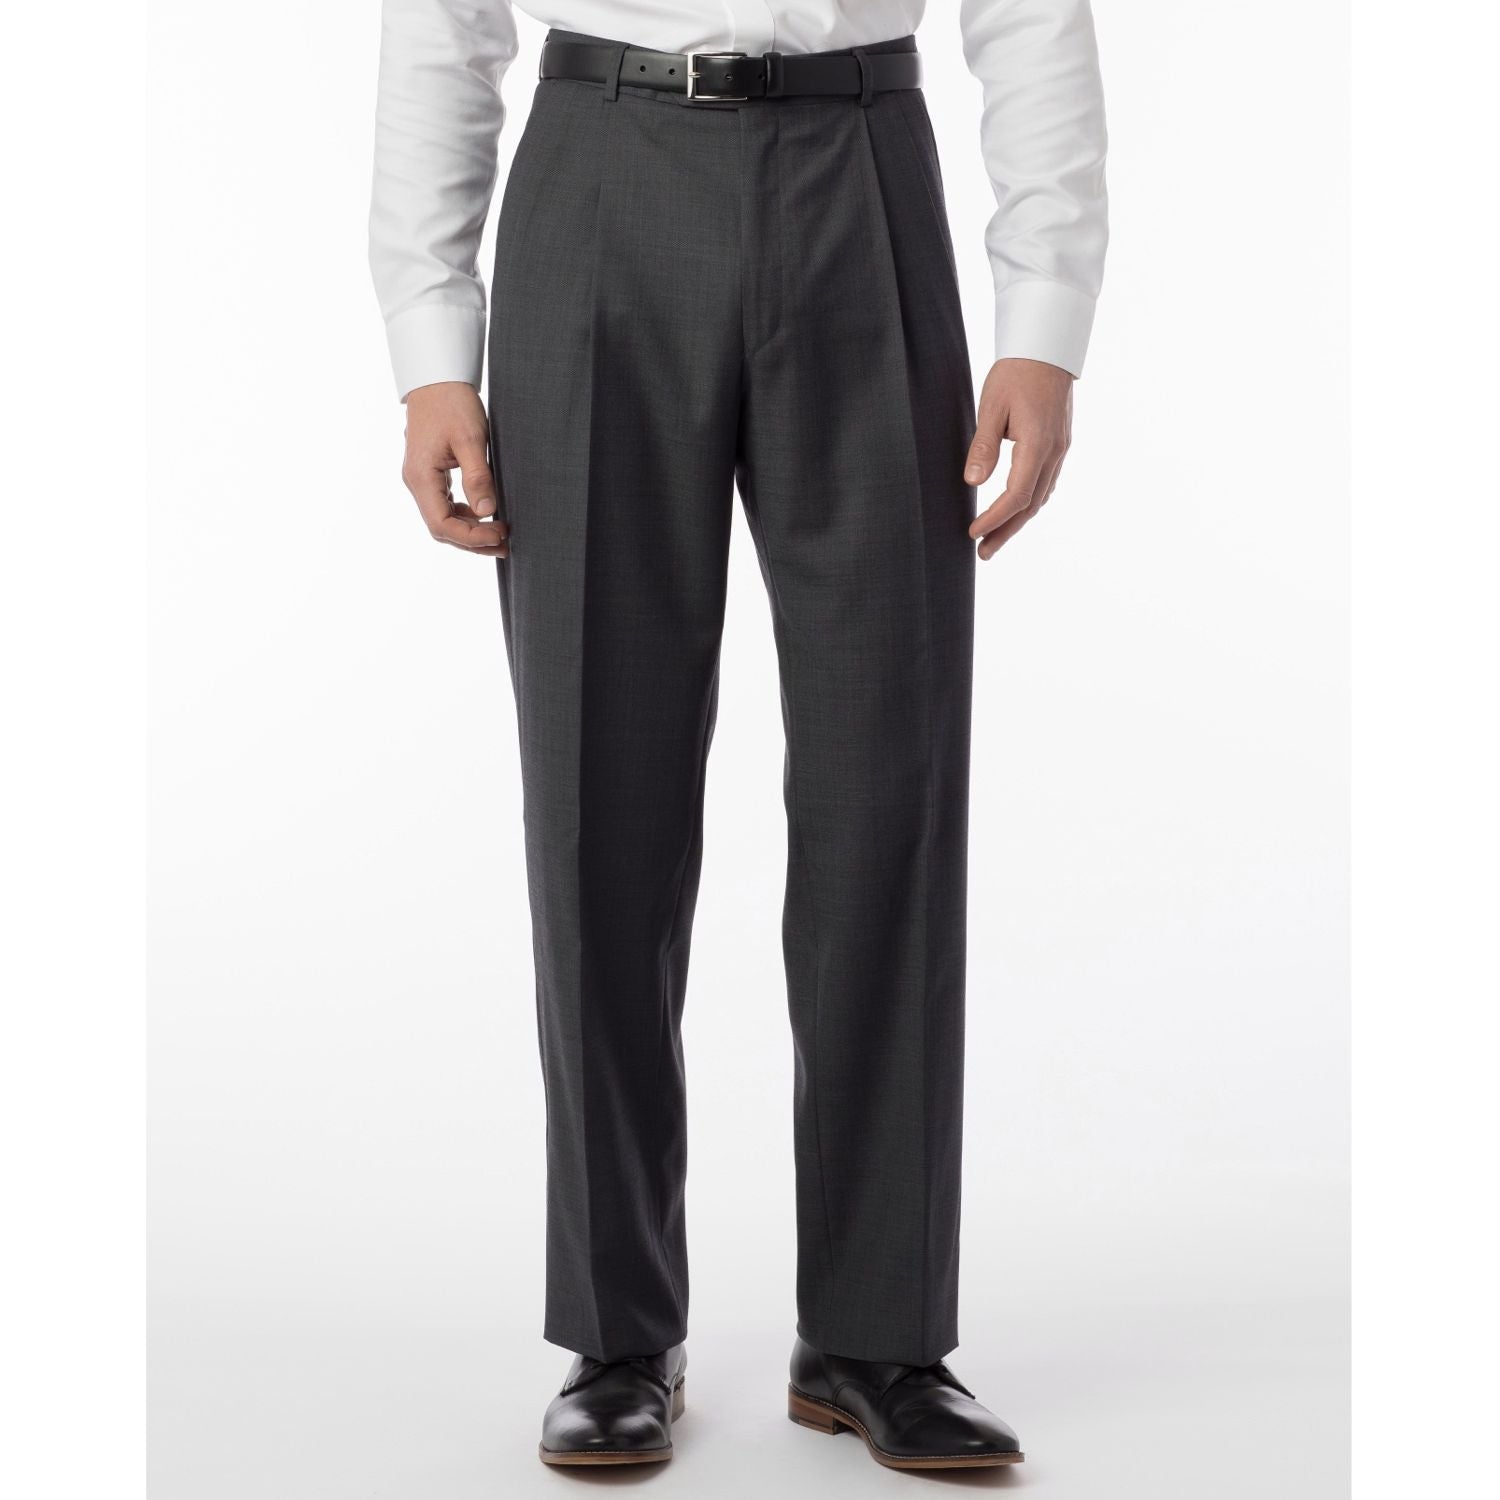 Super 120s Wool Travel Twill Comfort-EZE Trouser in Charcoal Grey (Manchester Pleated Model) by Ballin